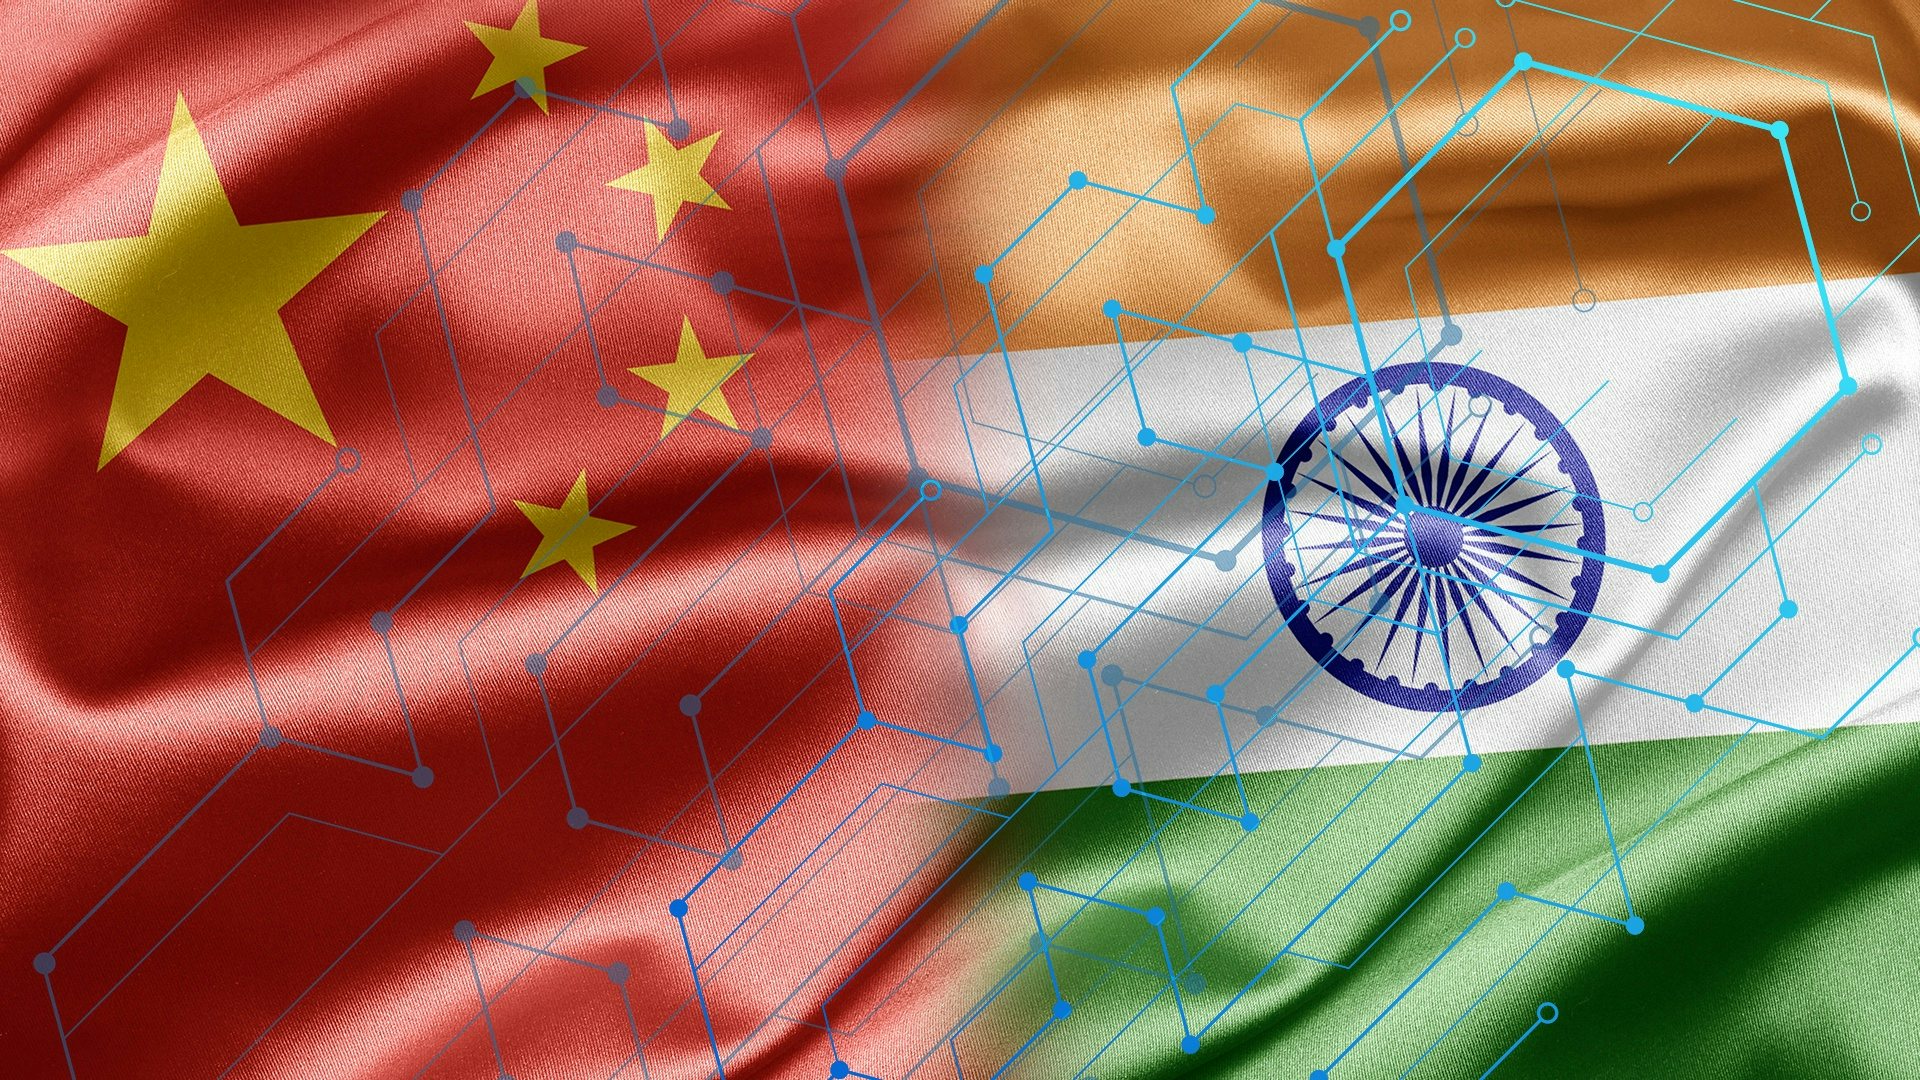 As some Western companies look to pull their supply chains out of China, India is designing incentives to lure global businesses to its shores.
Photo: Shutterstock